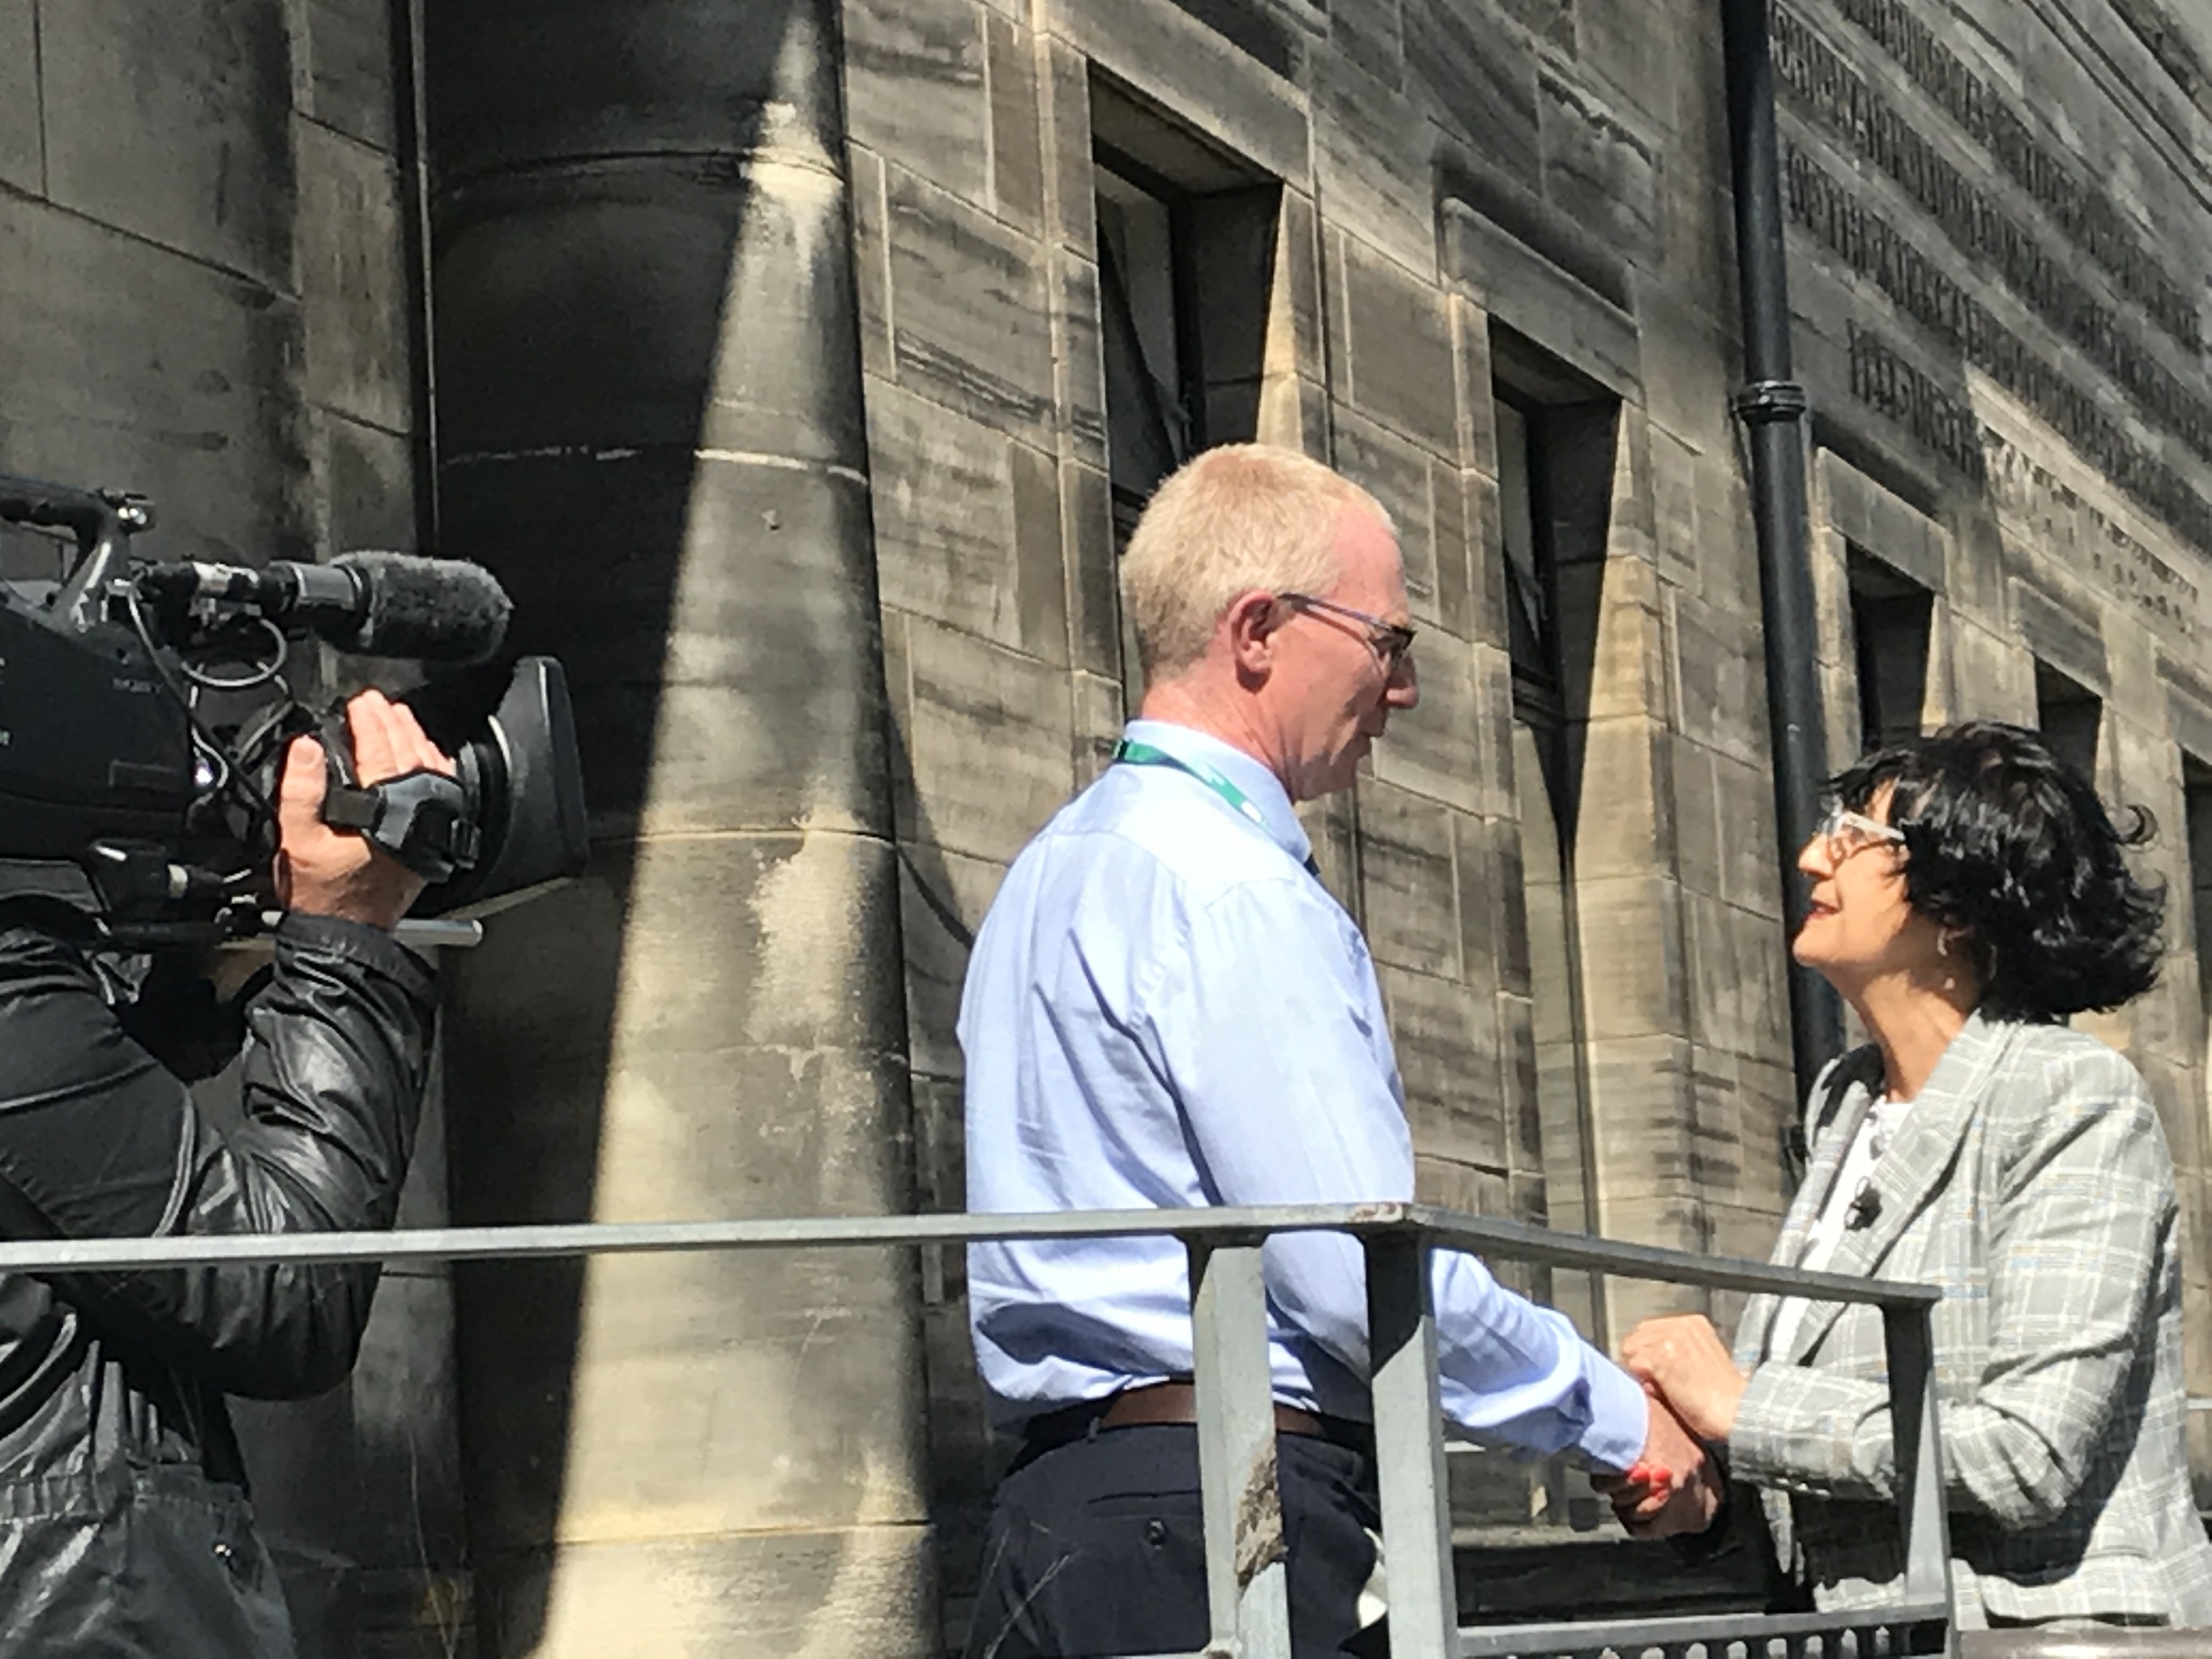 Collections curator Gavin Grant greets Anita Manning on the steps of Kirkcaldy Galleries.